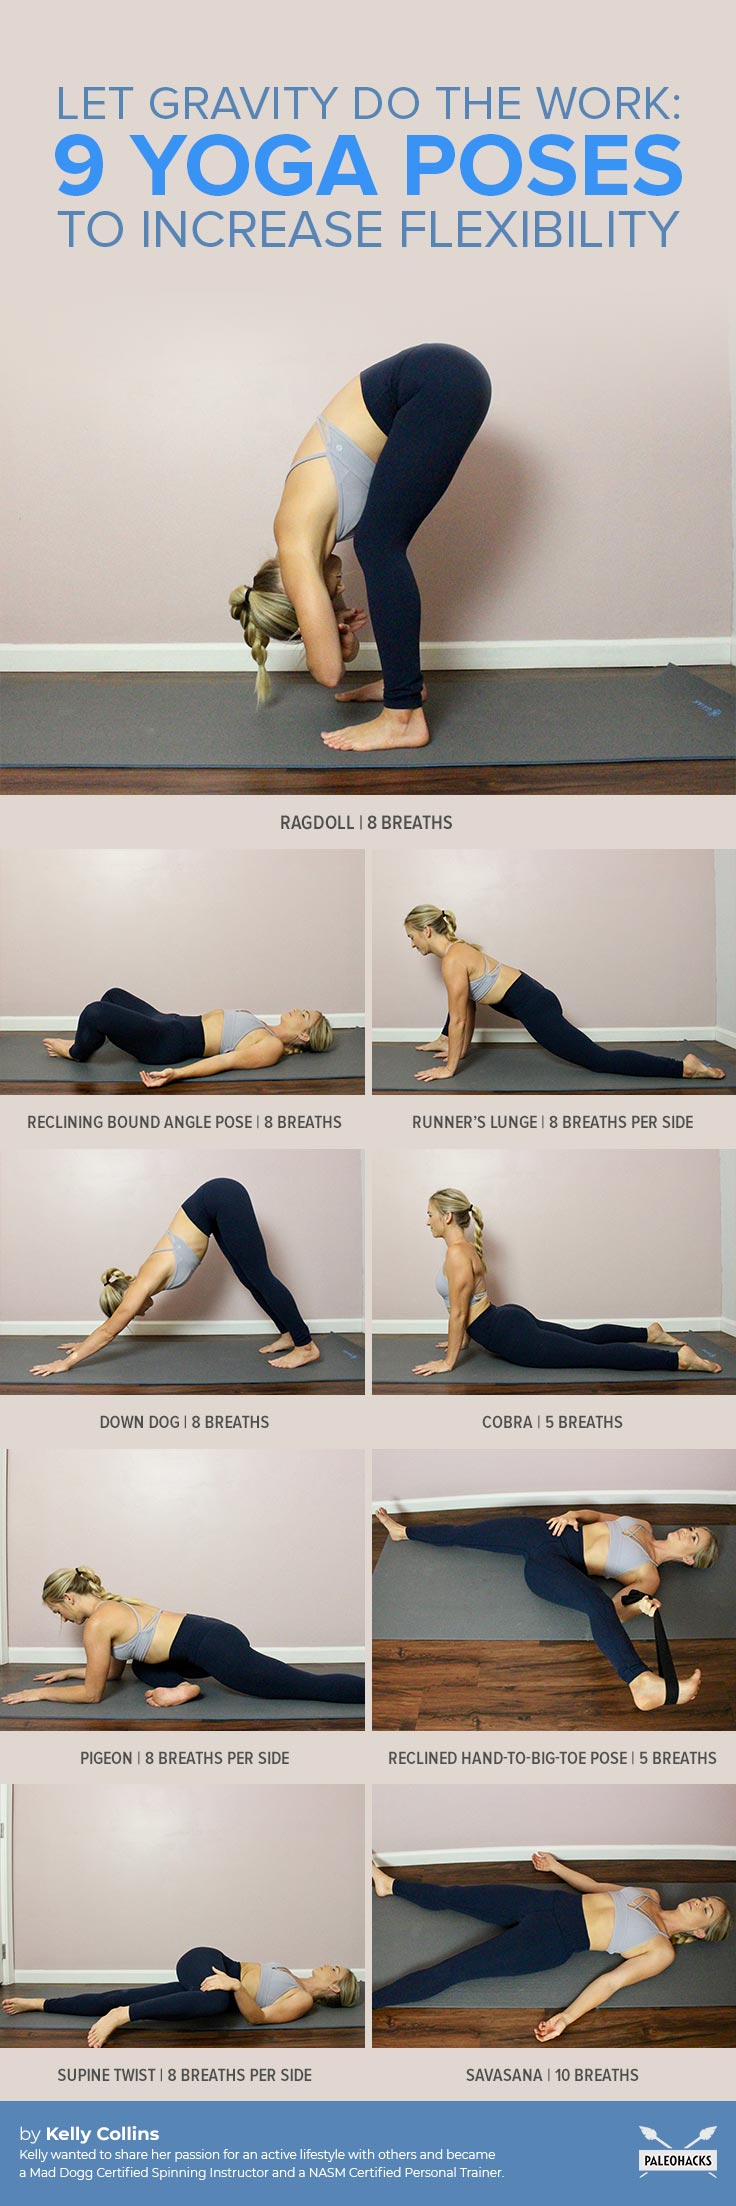 Relax and let gravity release tension in your hips, shoulders and thighs using these clever yoga poses to increase flexibility.